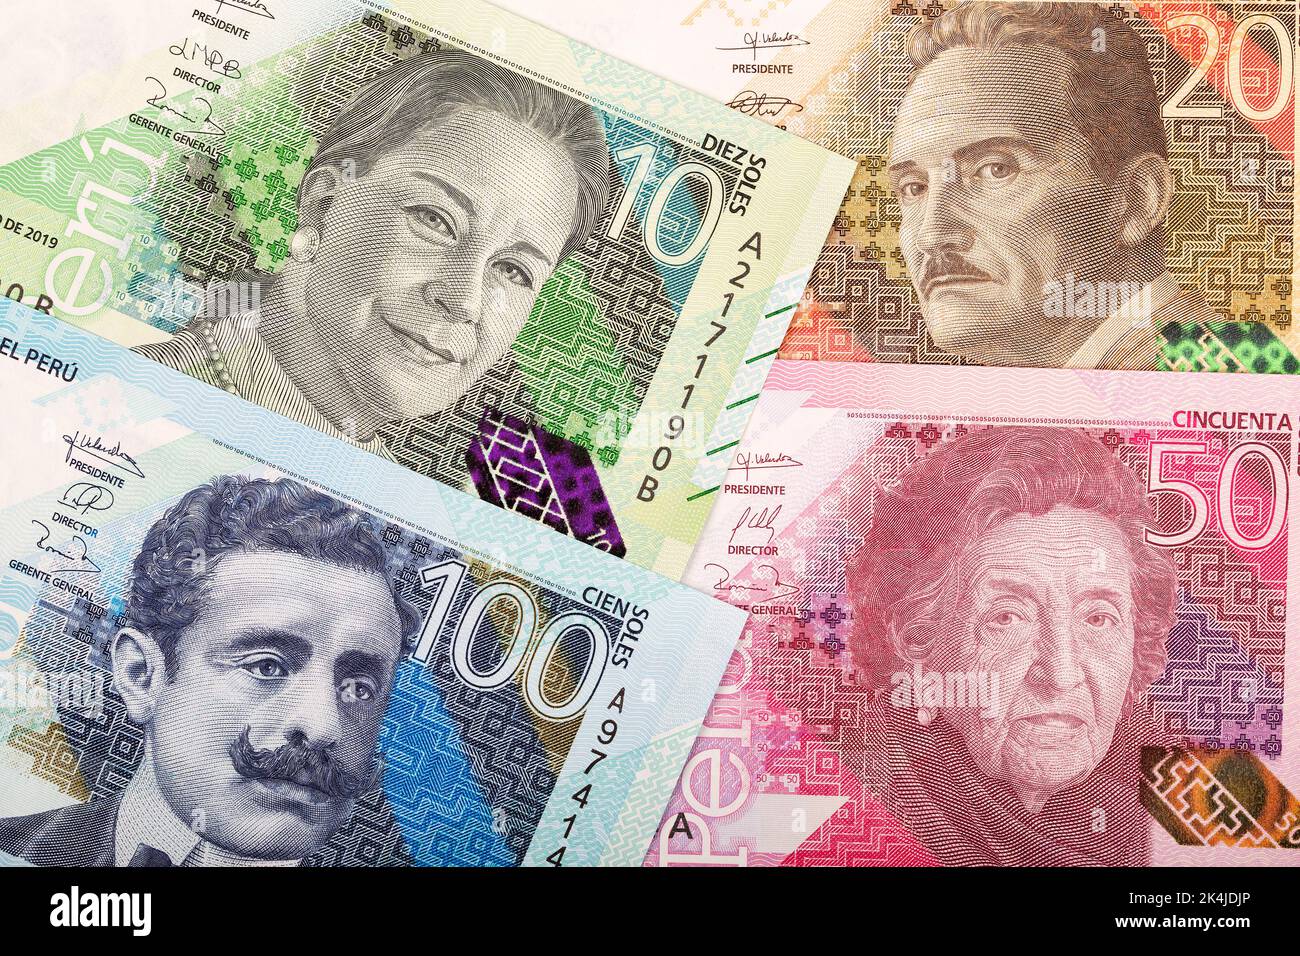 Peruvian money - Soles a business background from new series of banknotes Stock Photo